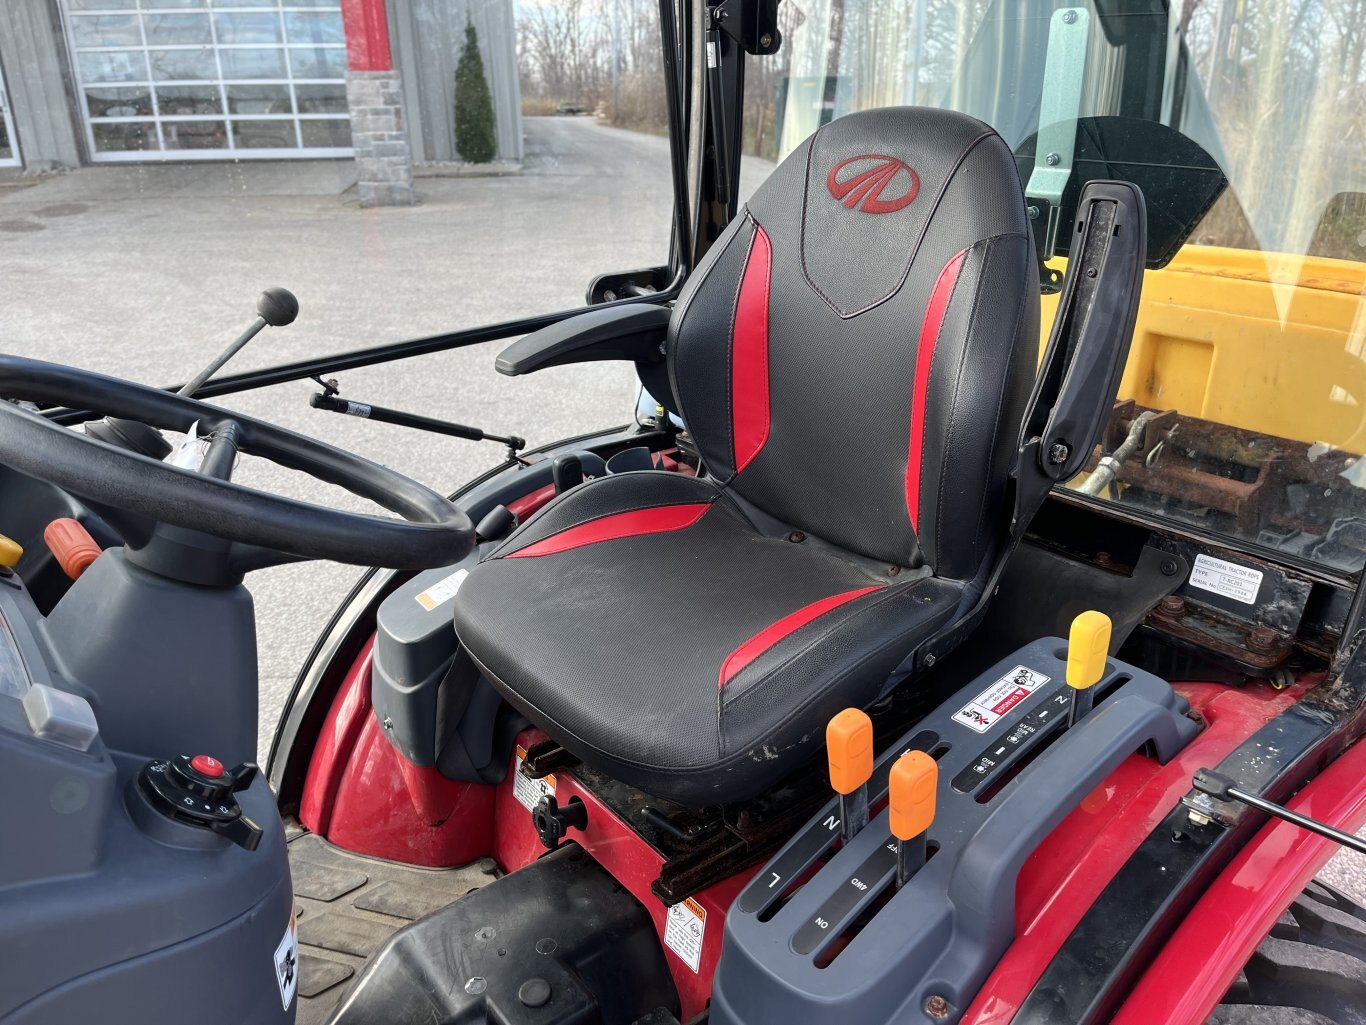 2019 Mahindra eMax 25L HST Cab Tractor (Pre Owned)